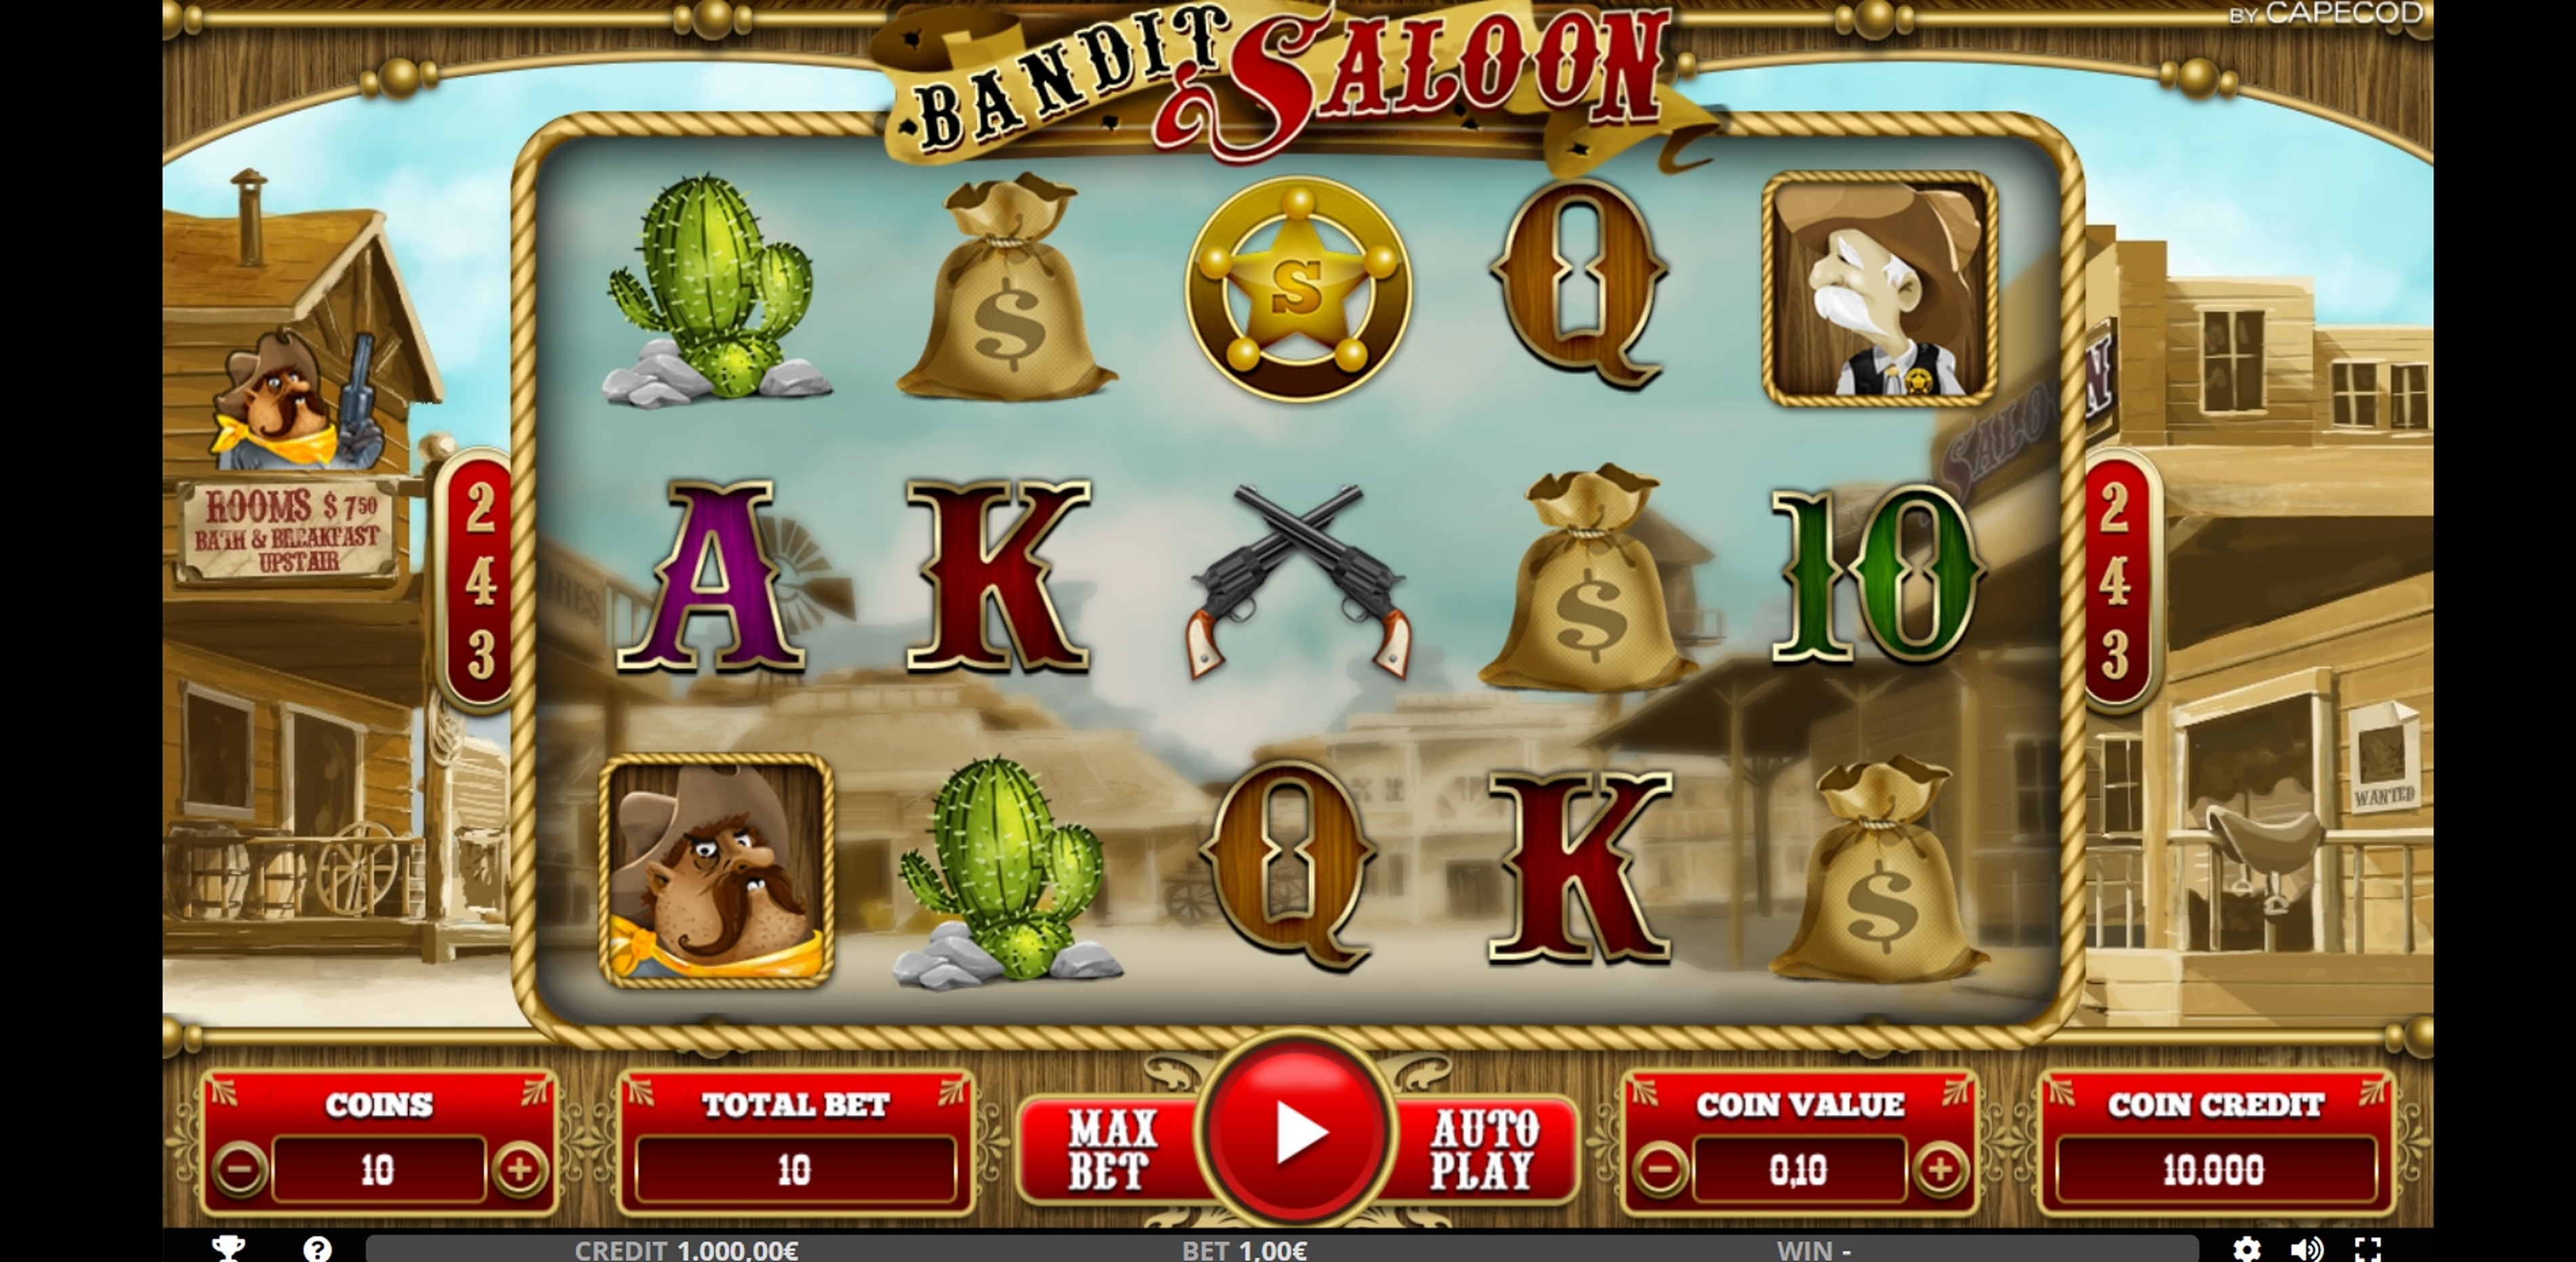 Reels in Bandit Saloon Slot Game by Capecod Gaming